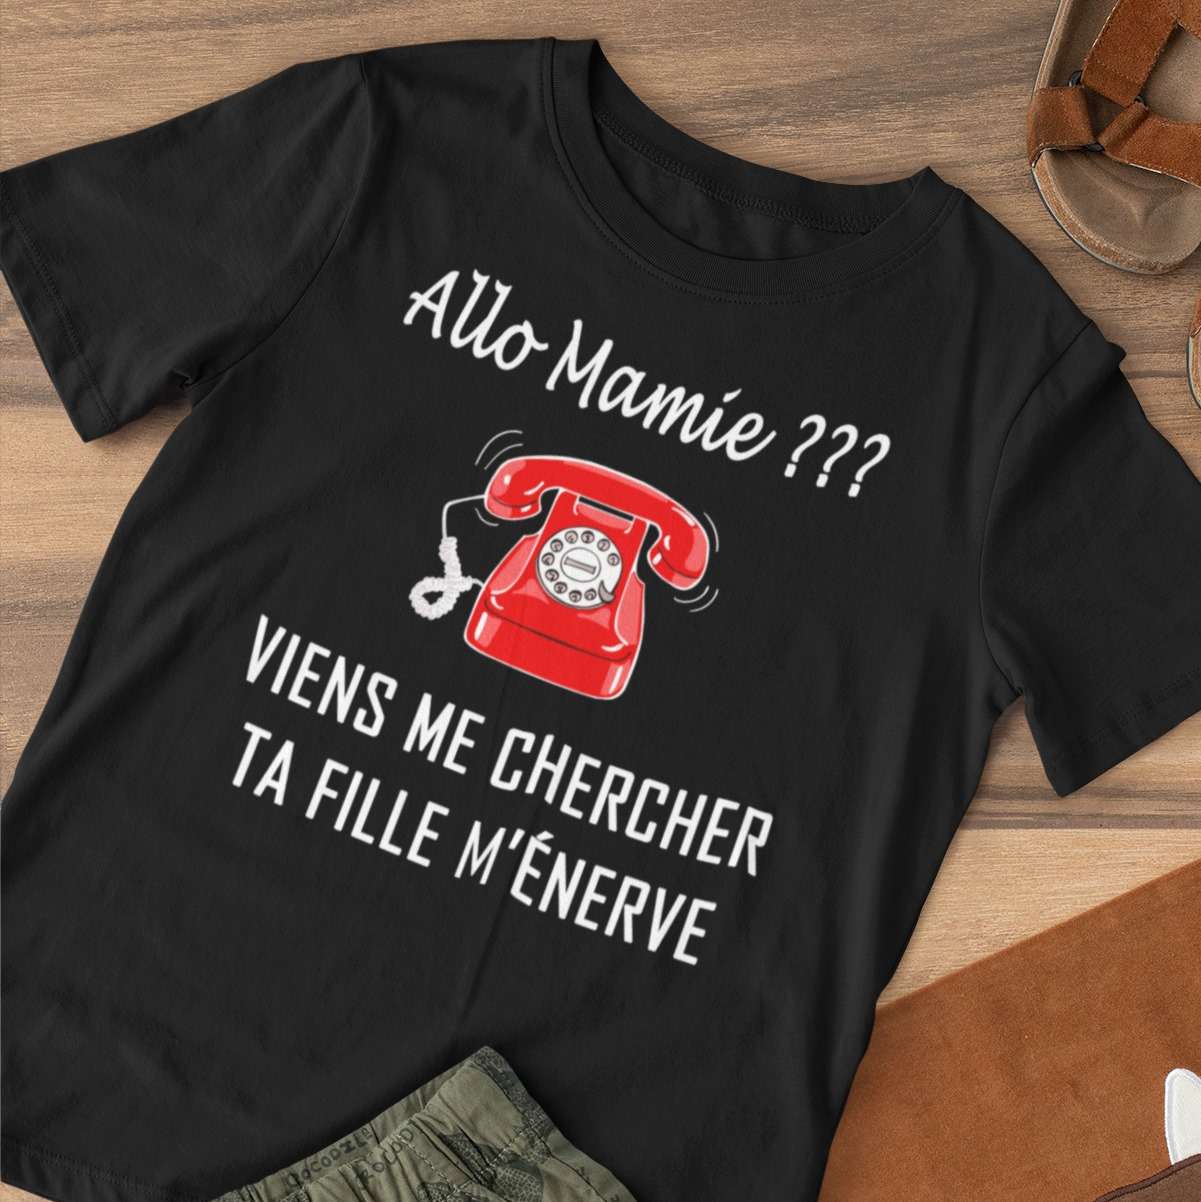 Allo Mamie Viens me chercher ta fille m'enerve - Red landline, call for mother, mother's day gift